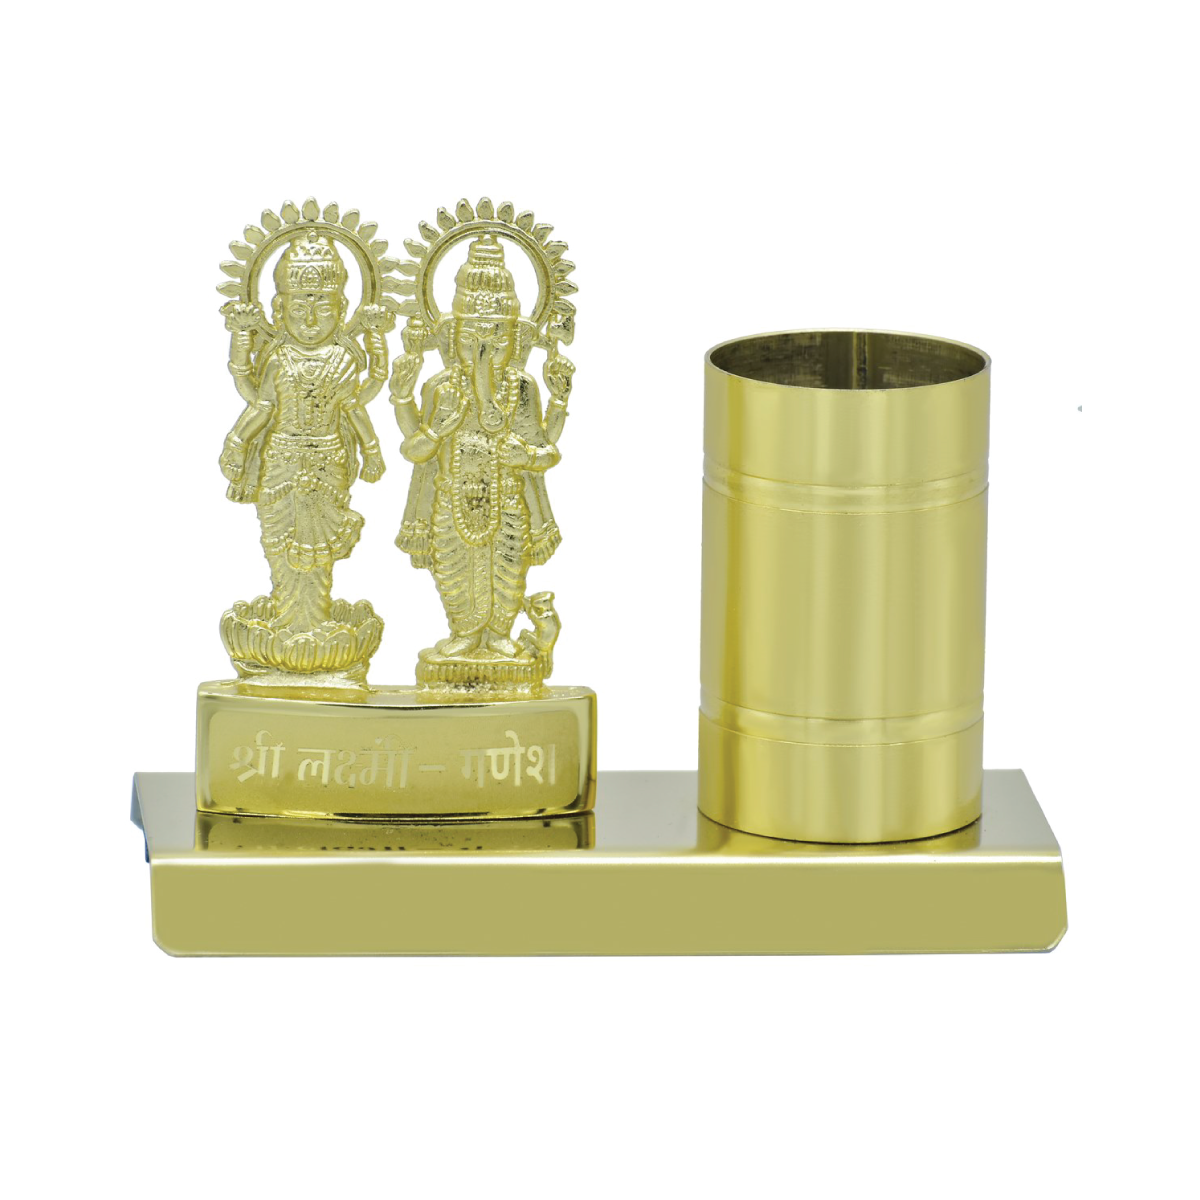 Desktop Golden Shri Laxmi Ganesh With Pen Stand - For Corporate Gifting, Diwali Gifting for Employees, Dealers, Stakeholders, Customers